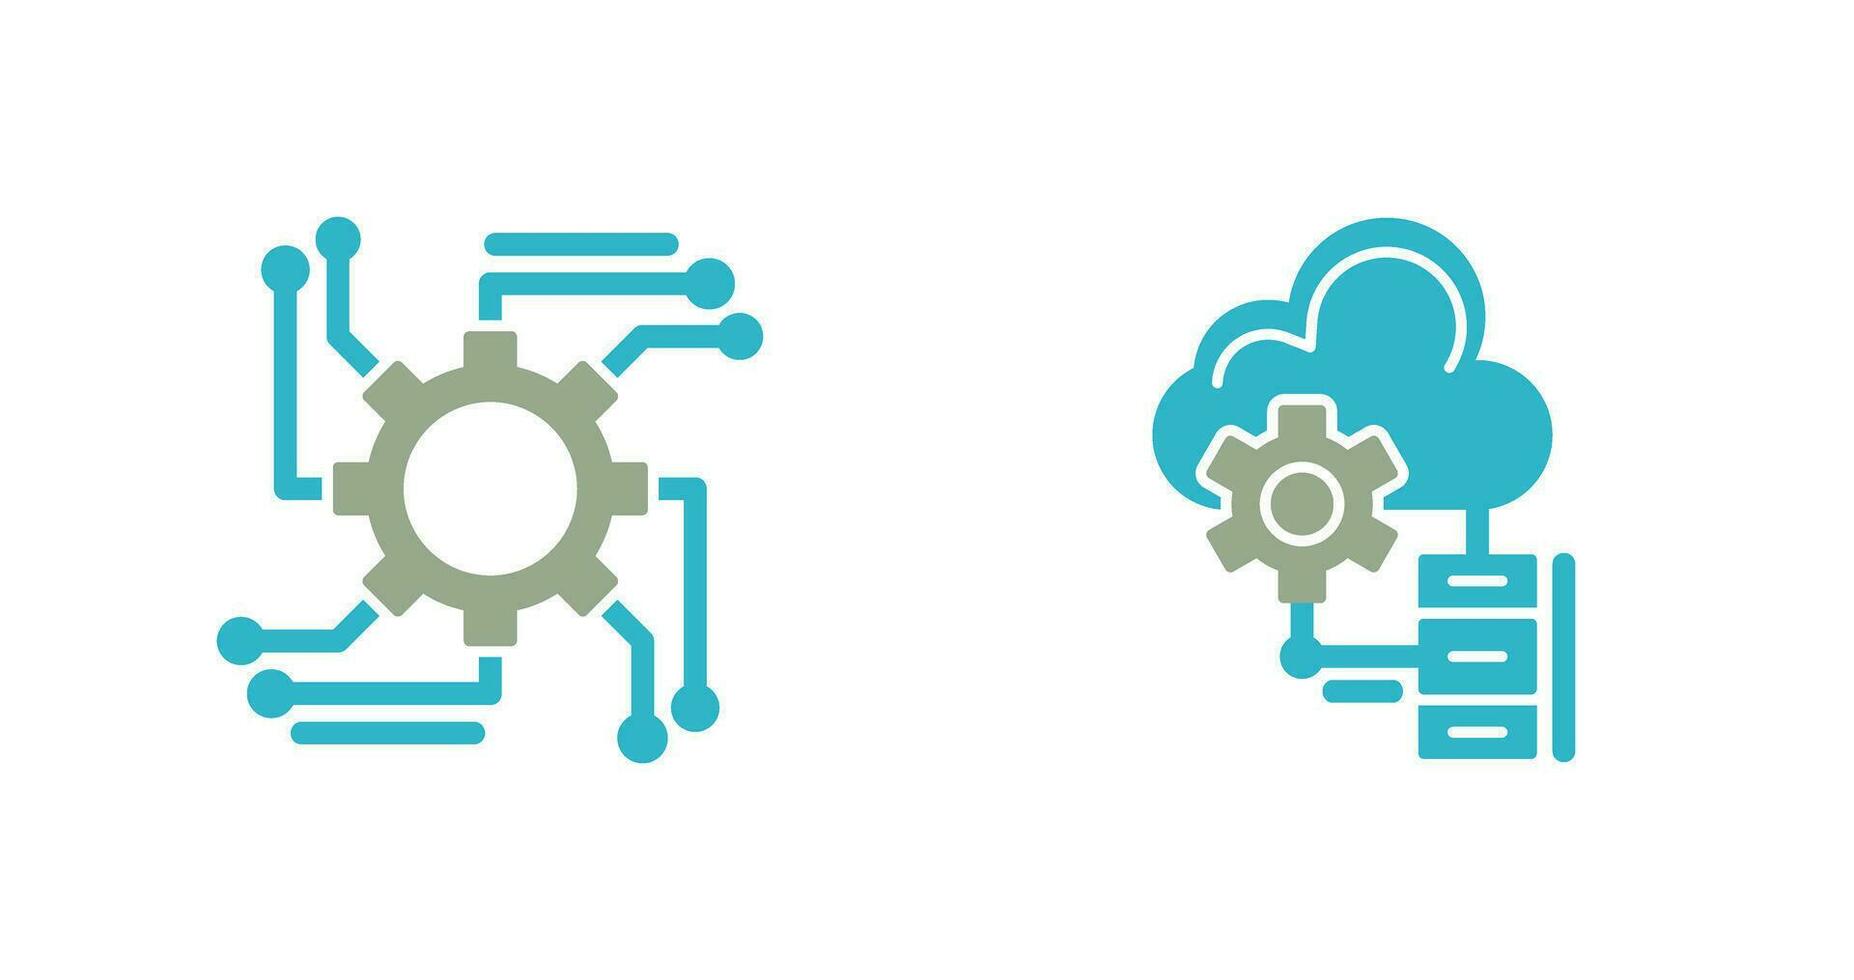 Automation and Big Data Icon vector